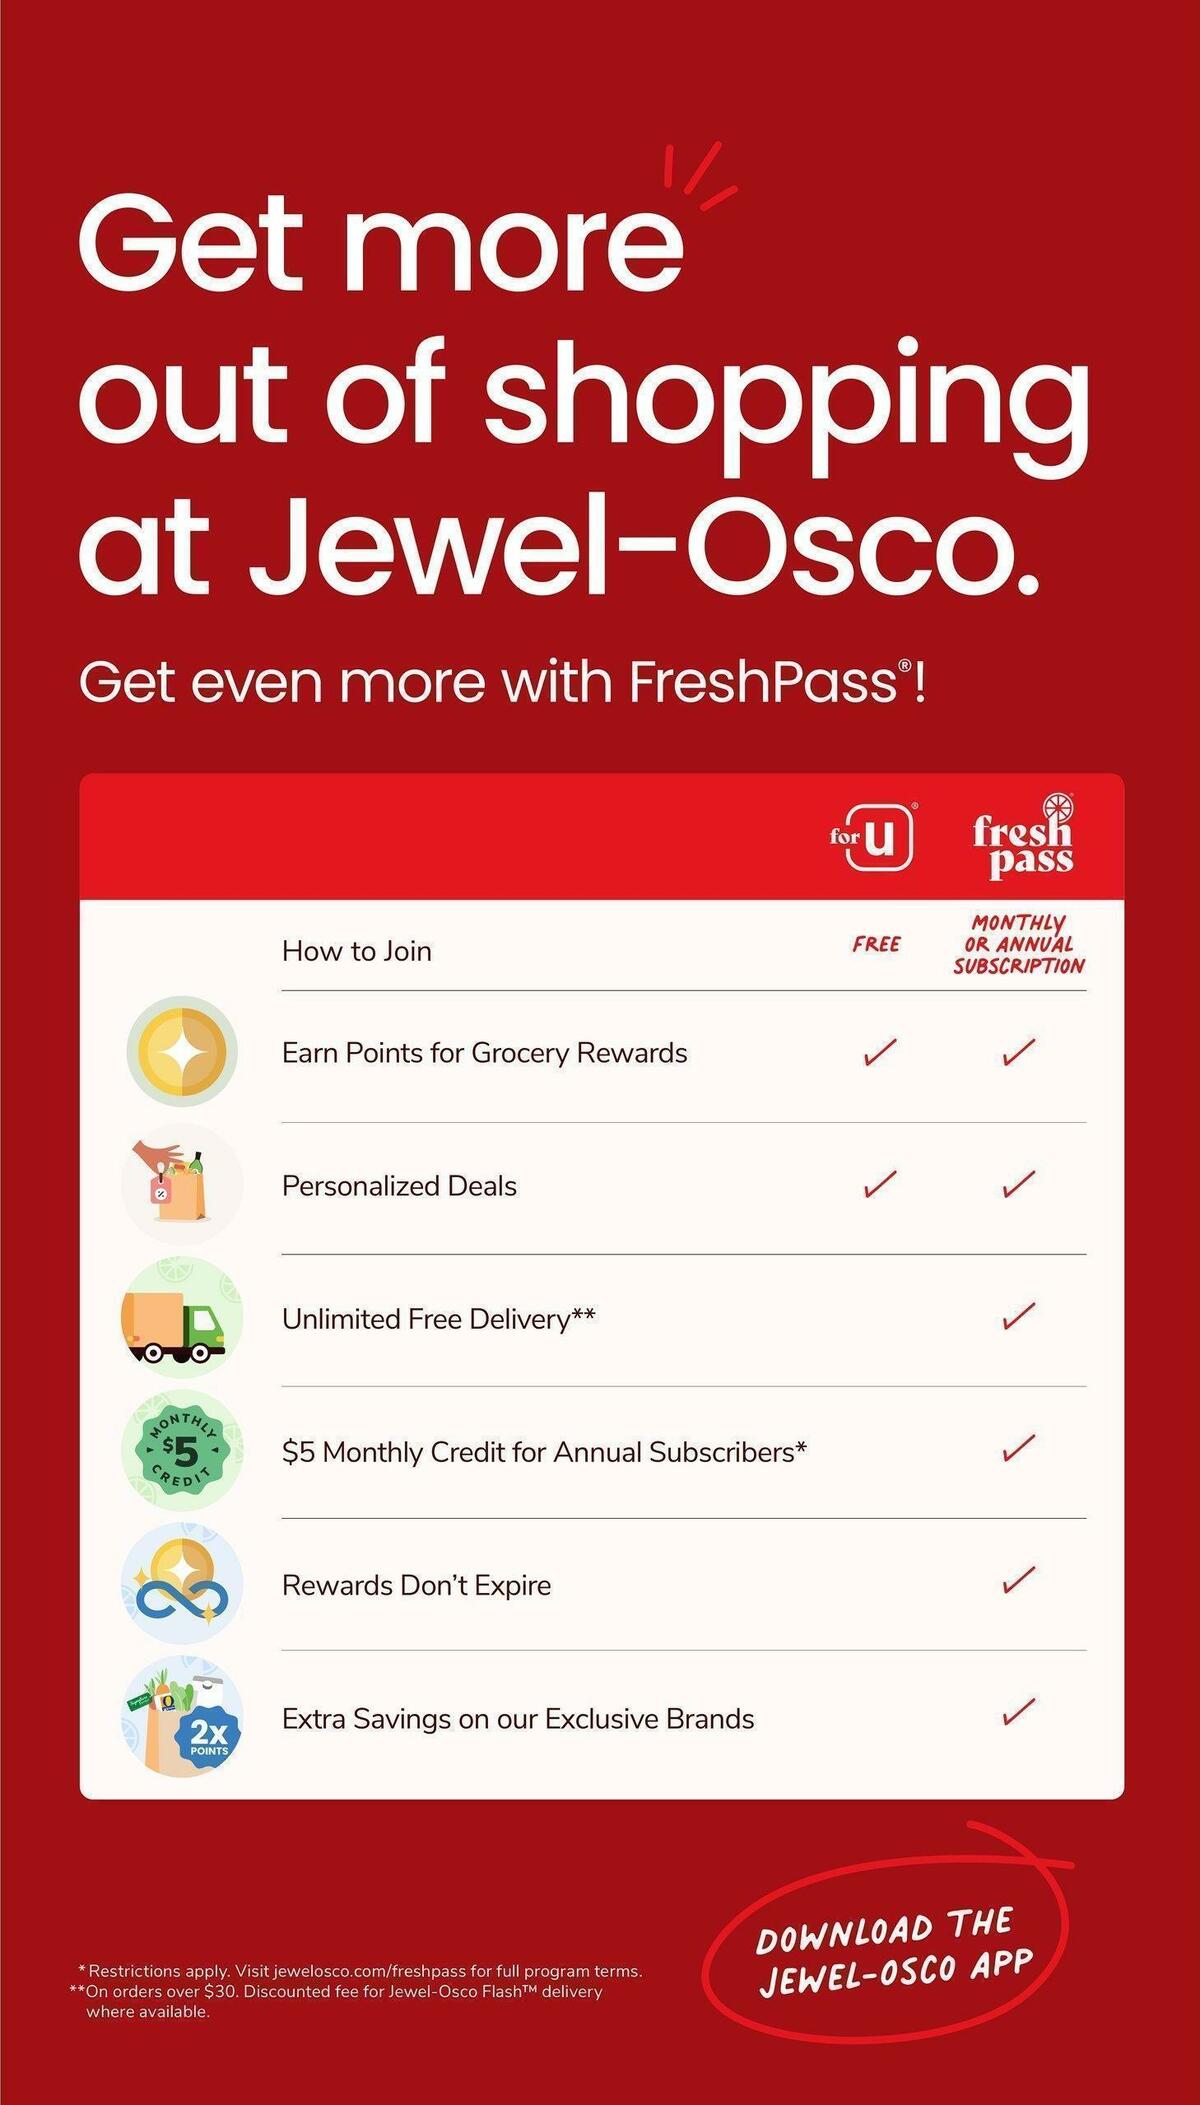 Jewel Osco Weekly Ad from March 29